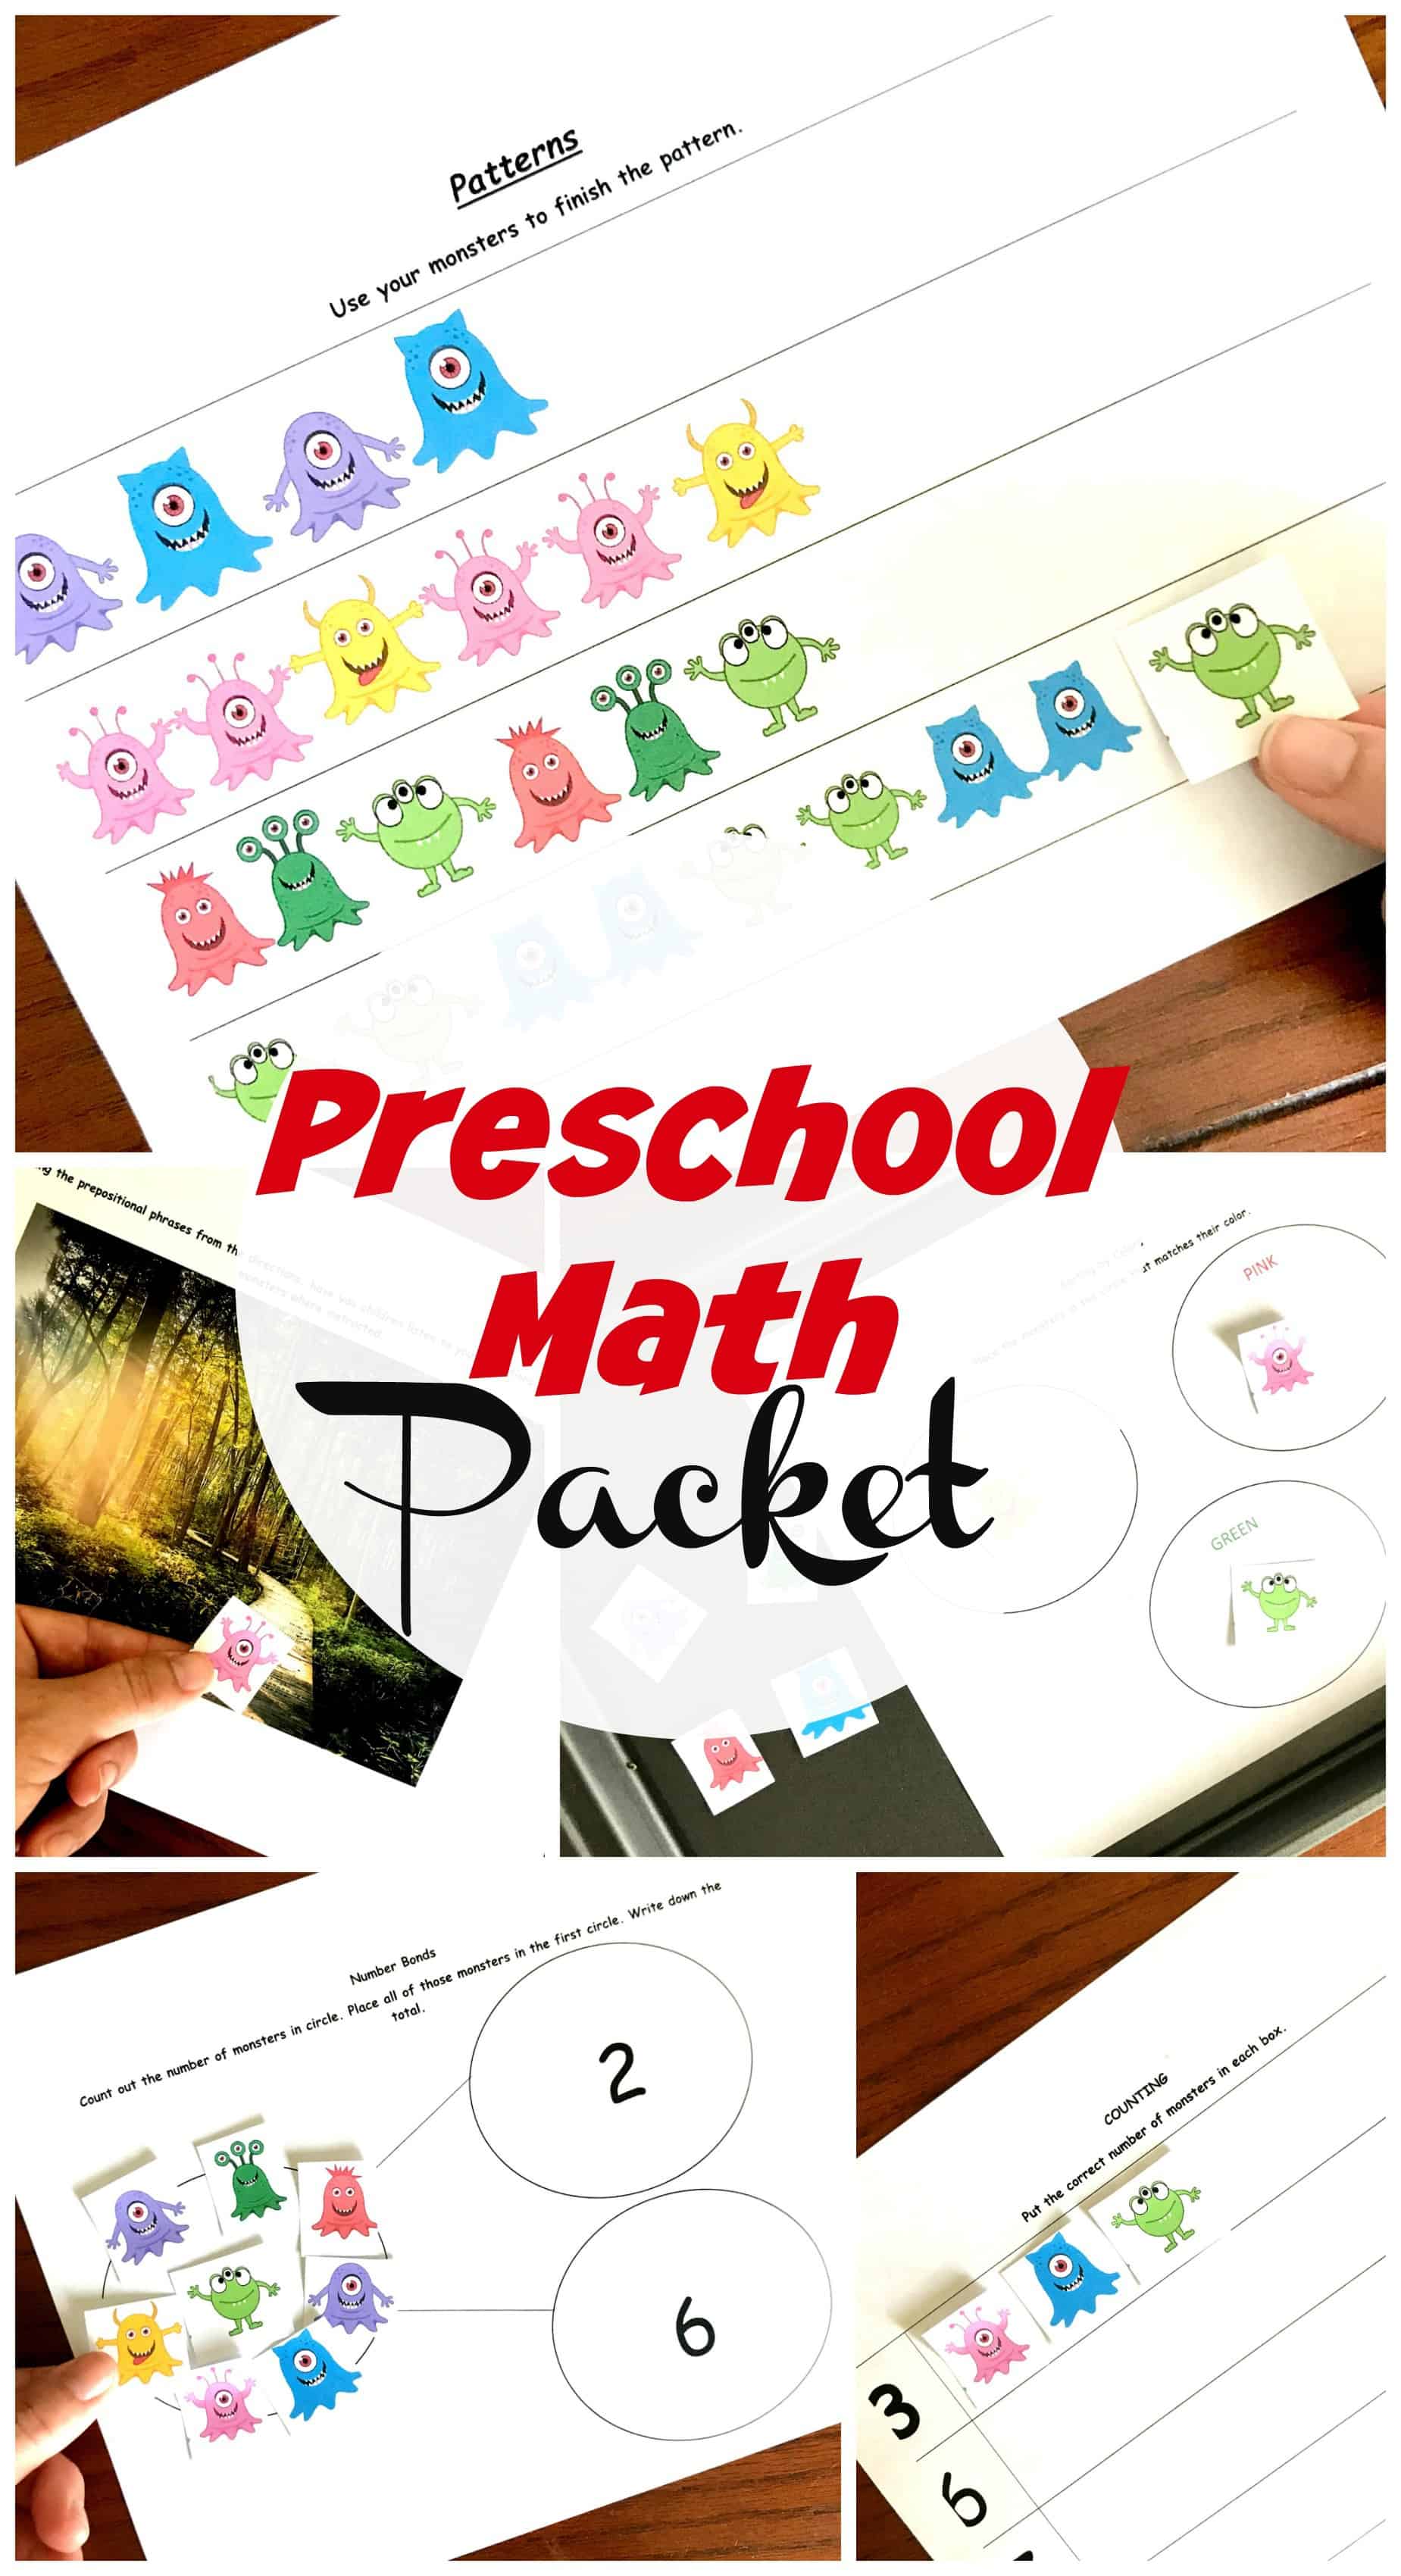 These preschool math worksheets are a fun way to practice number recognition, sorting, patterns, prepositions, and basic adding and subtracting. (Number Bonds)